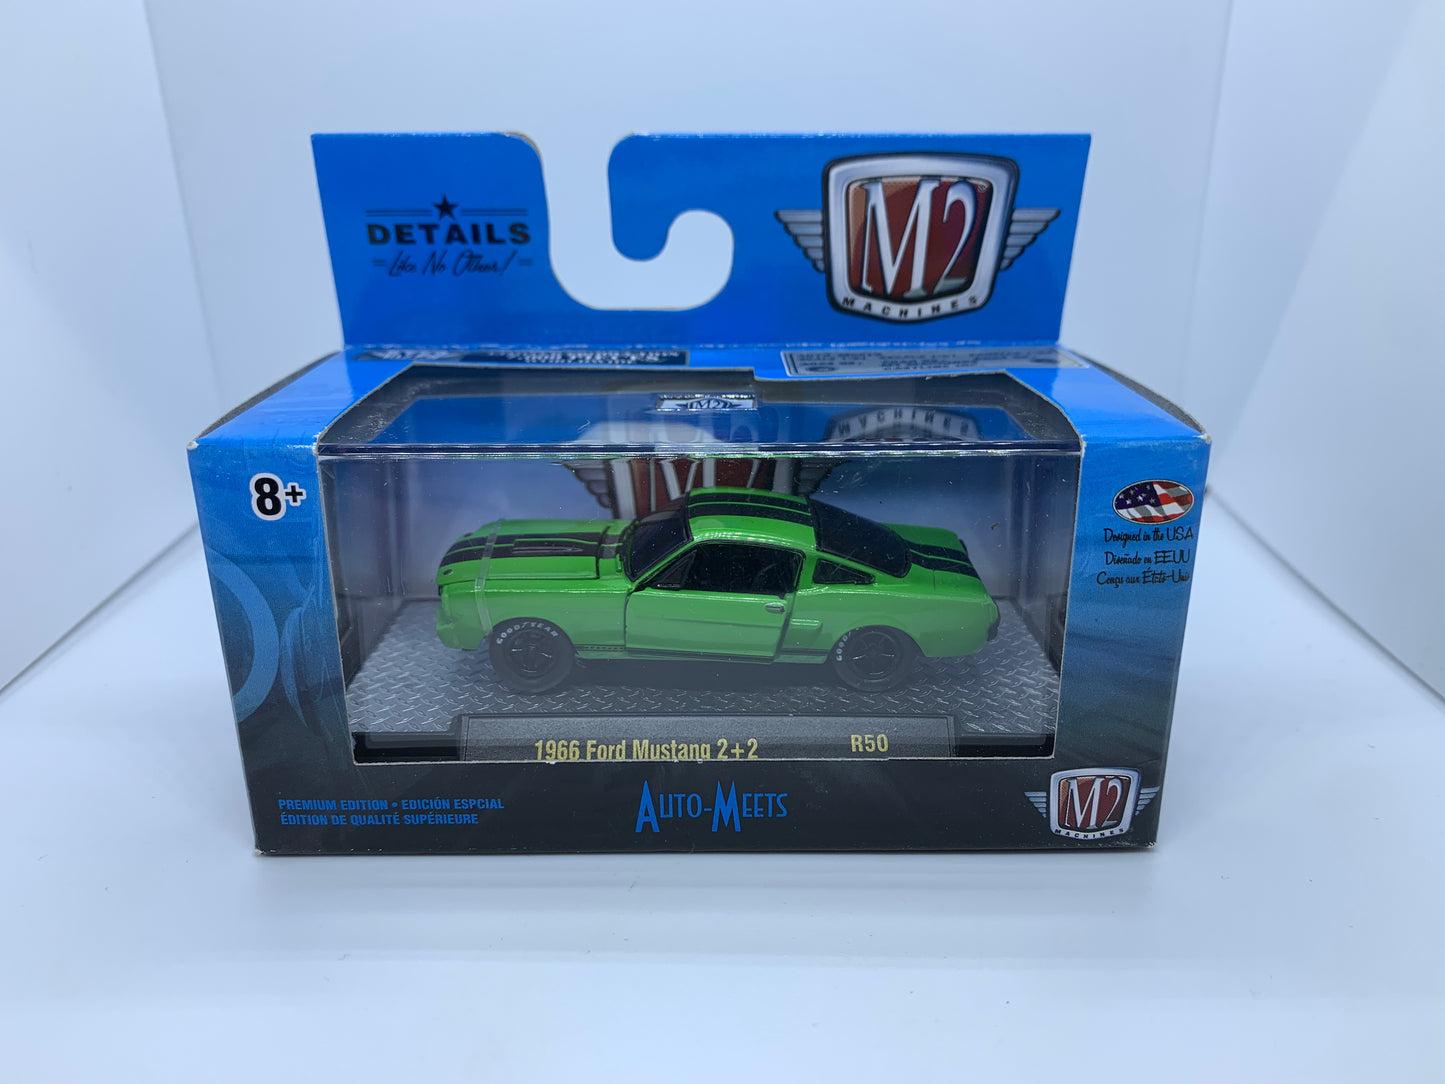 M2 Machines - 1966 Ford Mustang 2+2 Green Auto-Meets - Box Pack